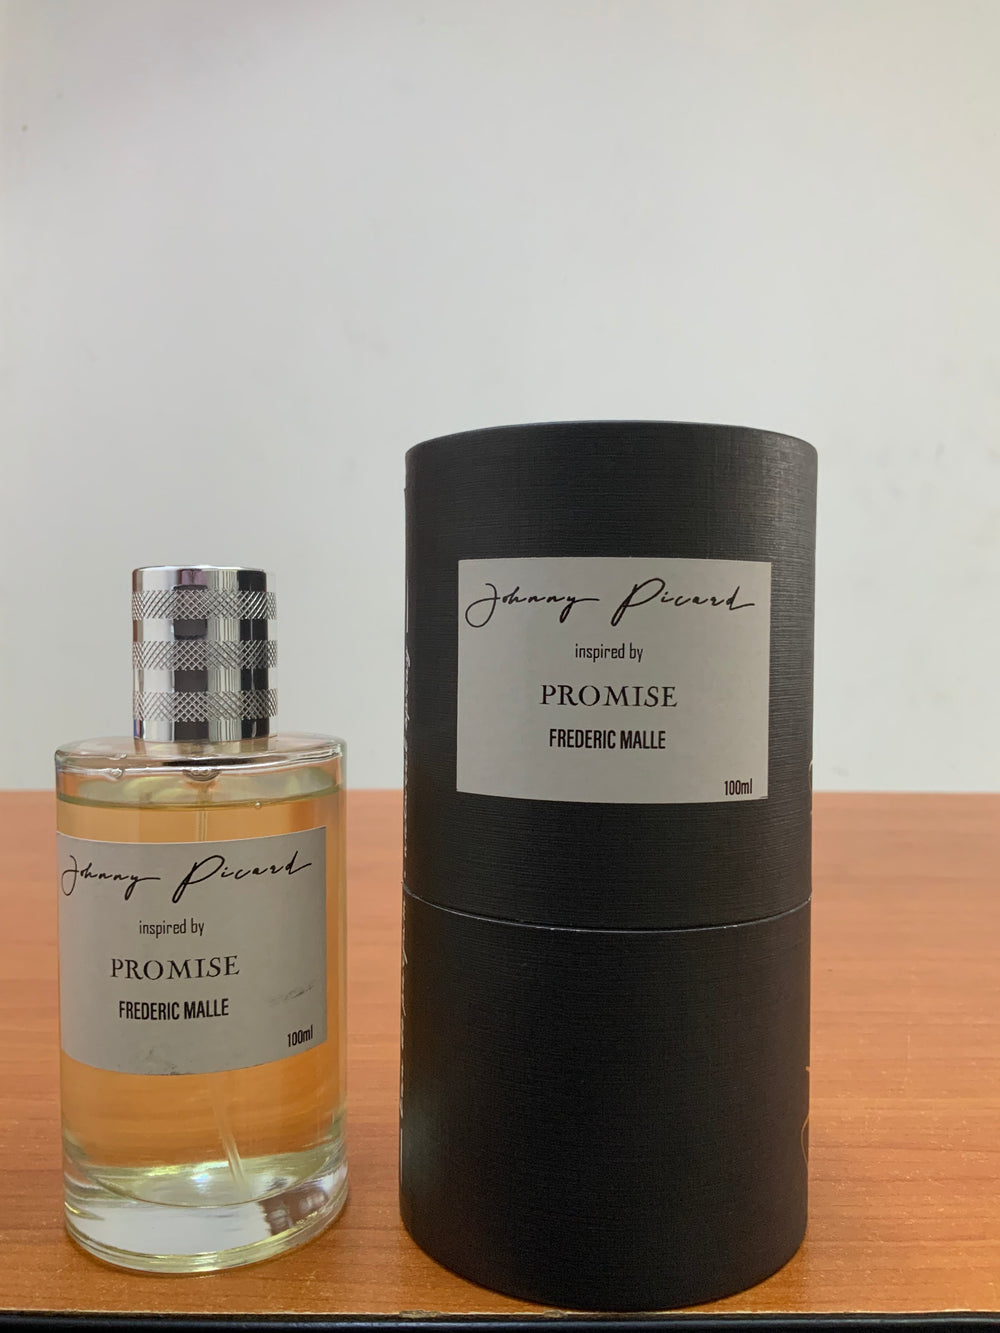 johnny picard inspired by promise   FREDERIC MALLE